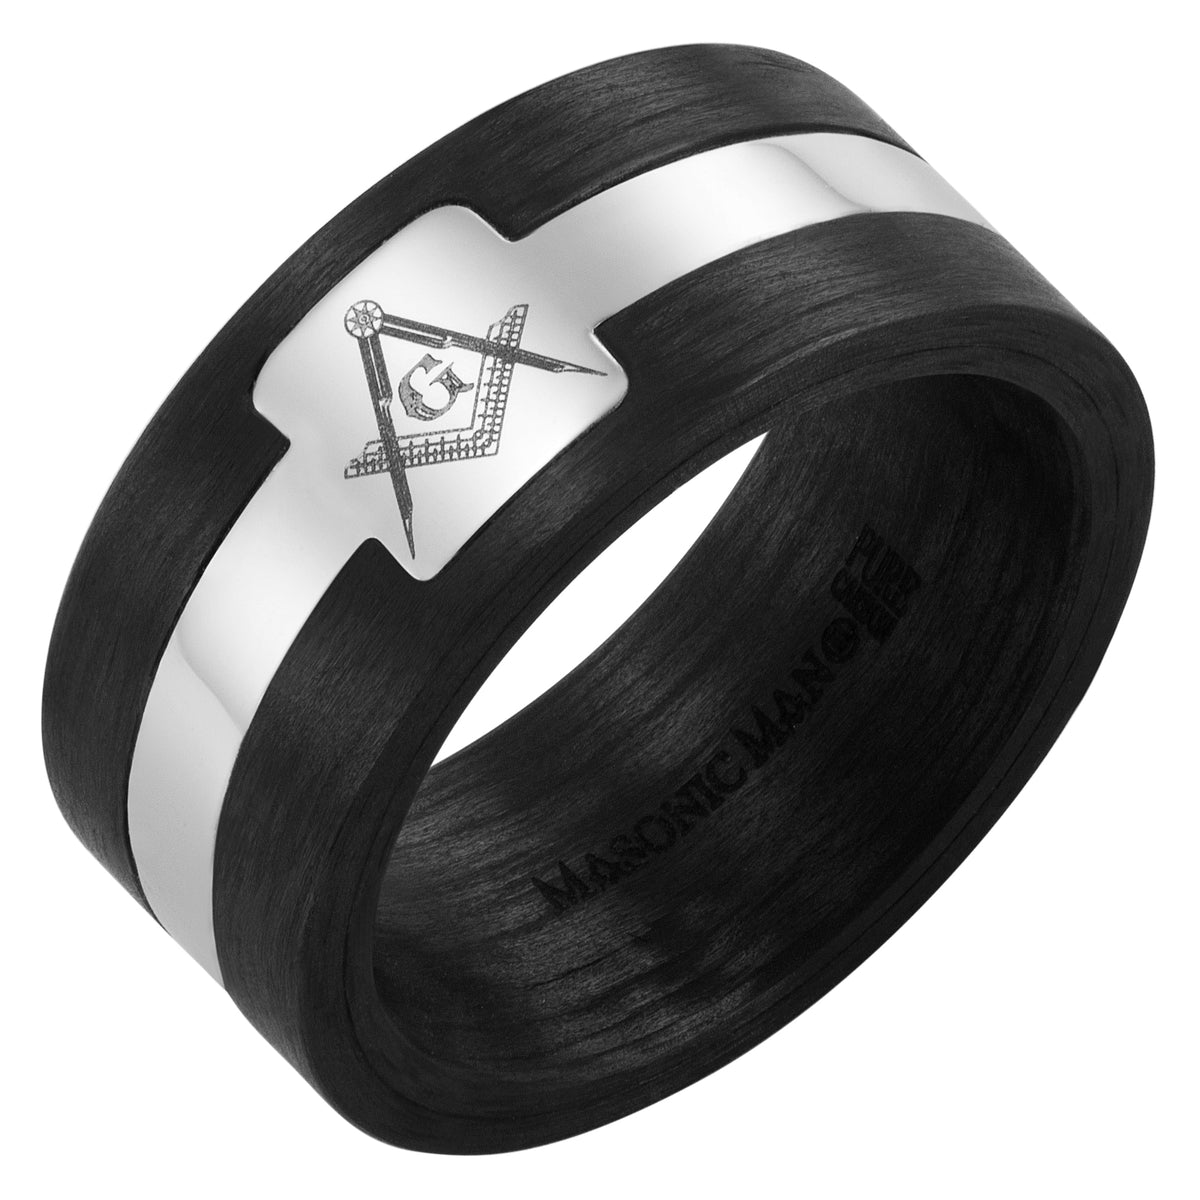 Pure Carbon Fiber 10mm Ring with Masonic Square and Compass